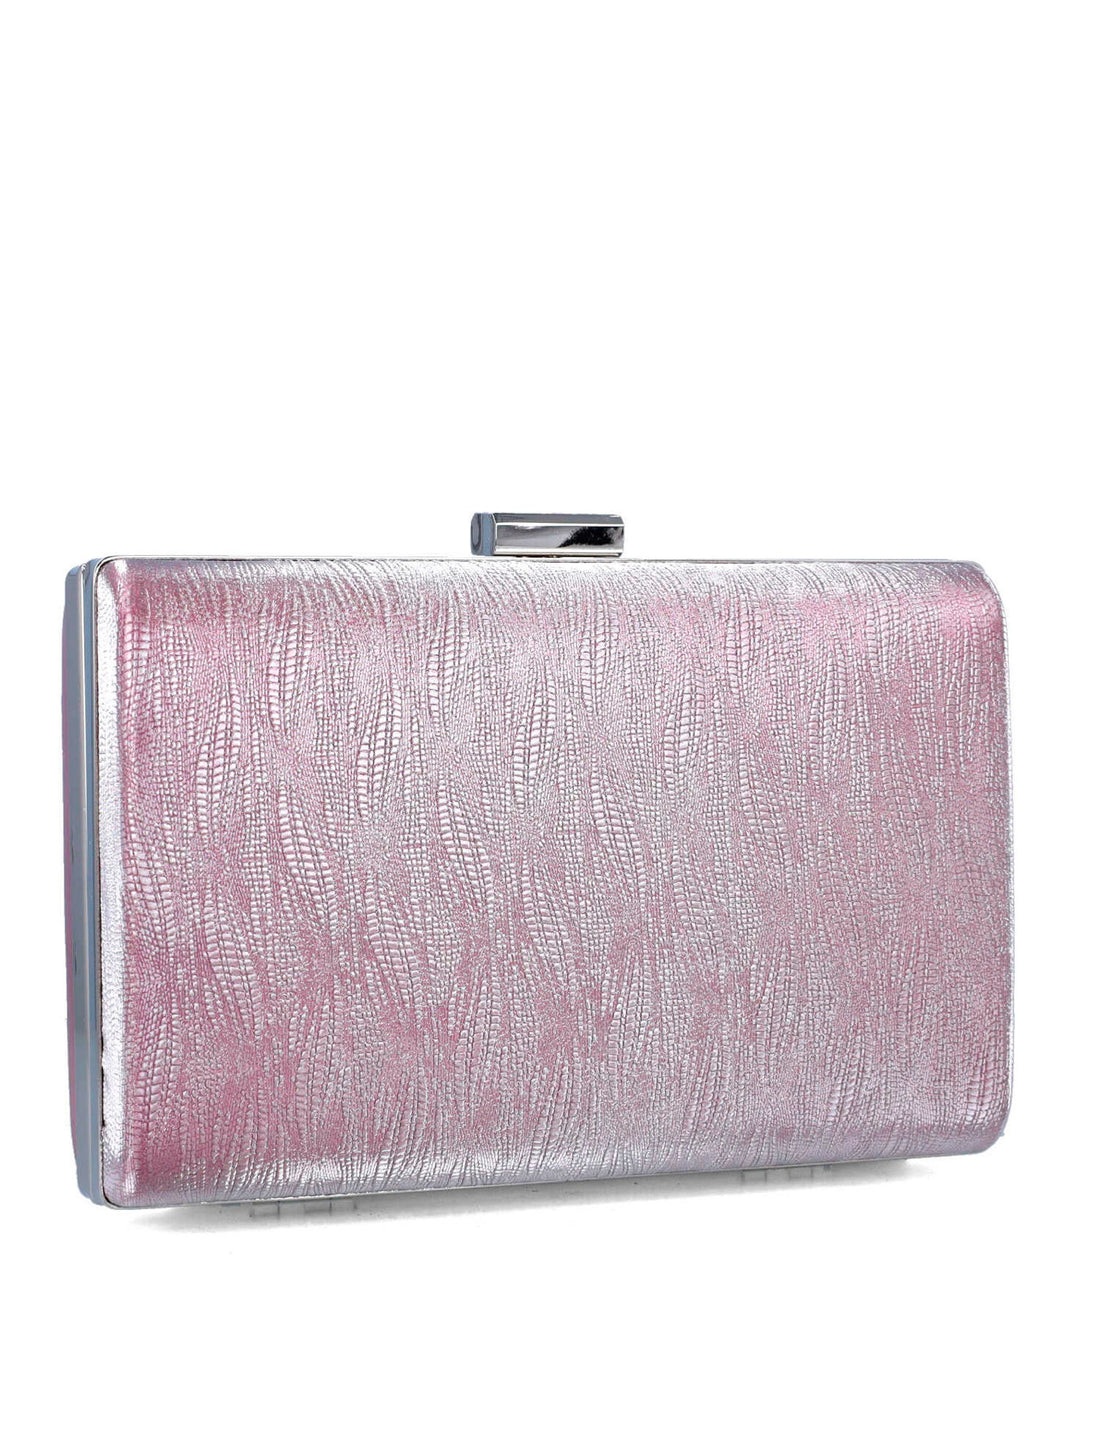 Pink Clutch With Design_85496_84_02